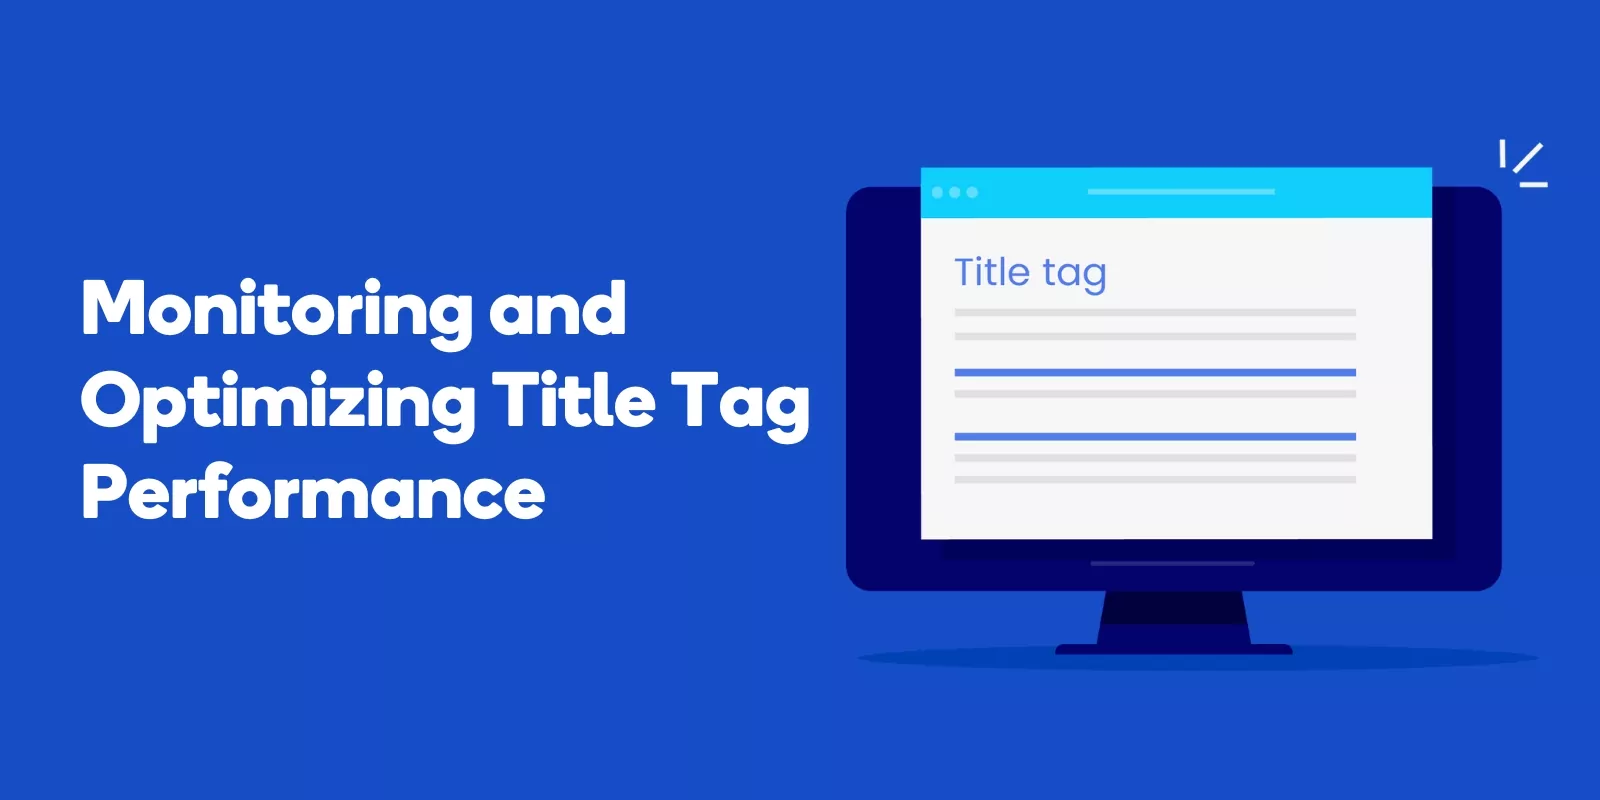 Monitoring and Optimizing Title Tag Performance